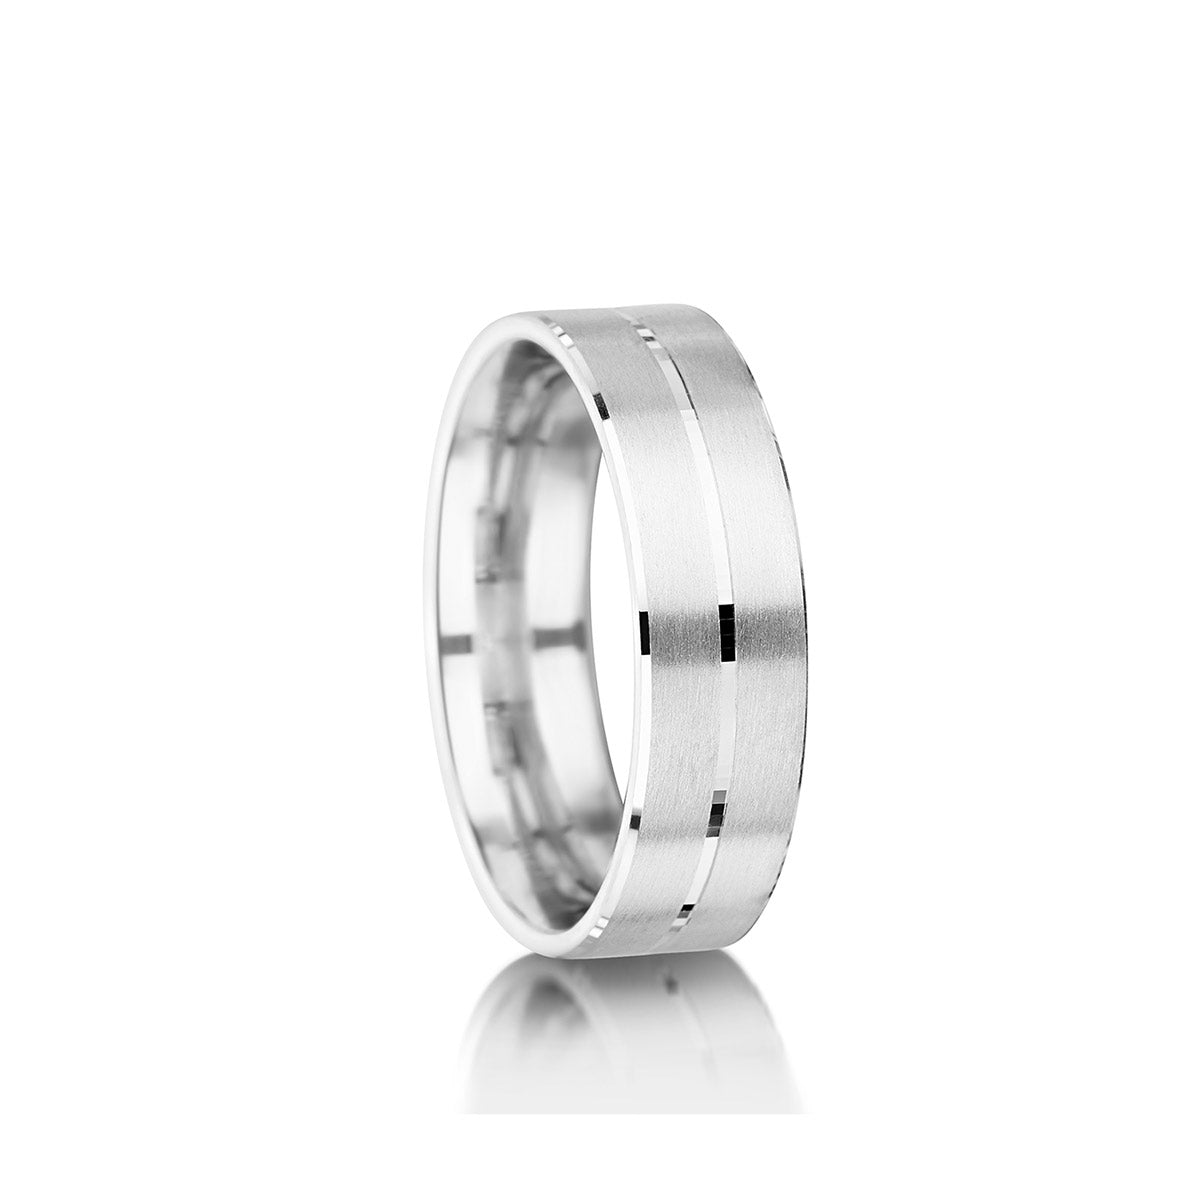 Mens Wedding Ring With Brushed Finish and Polished Groove – MWR15